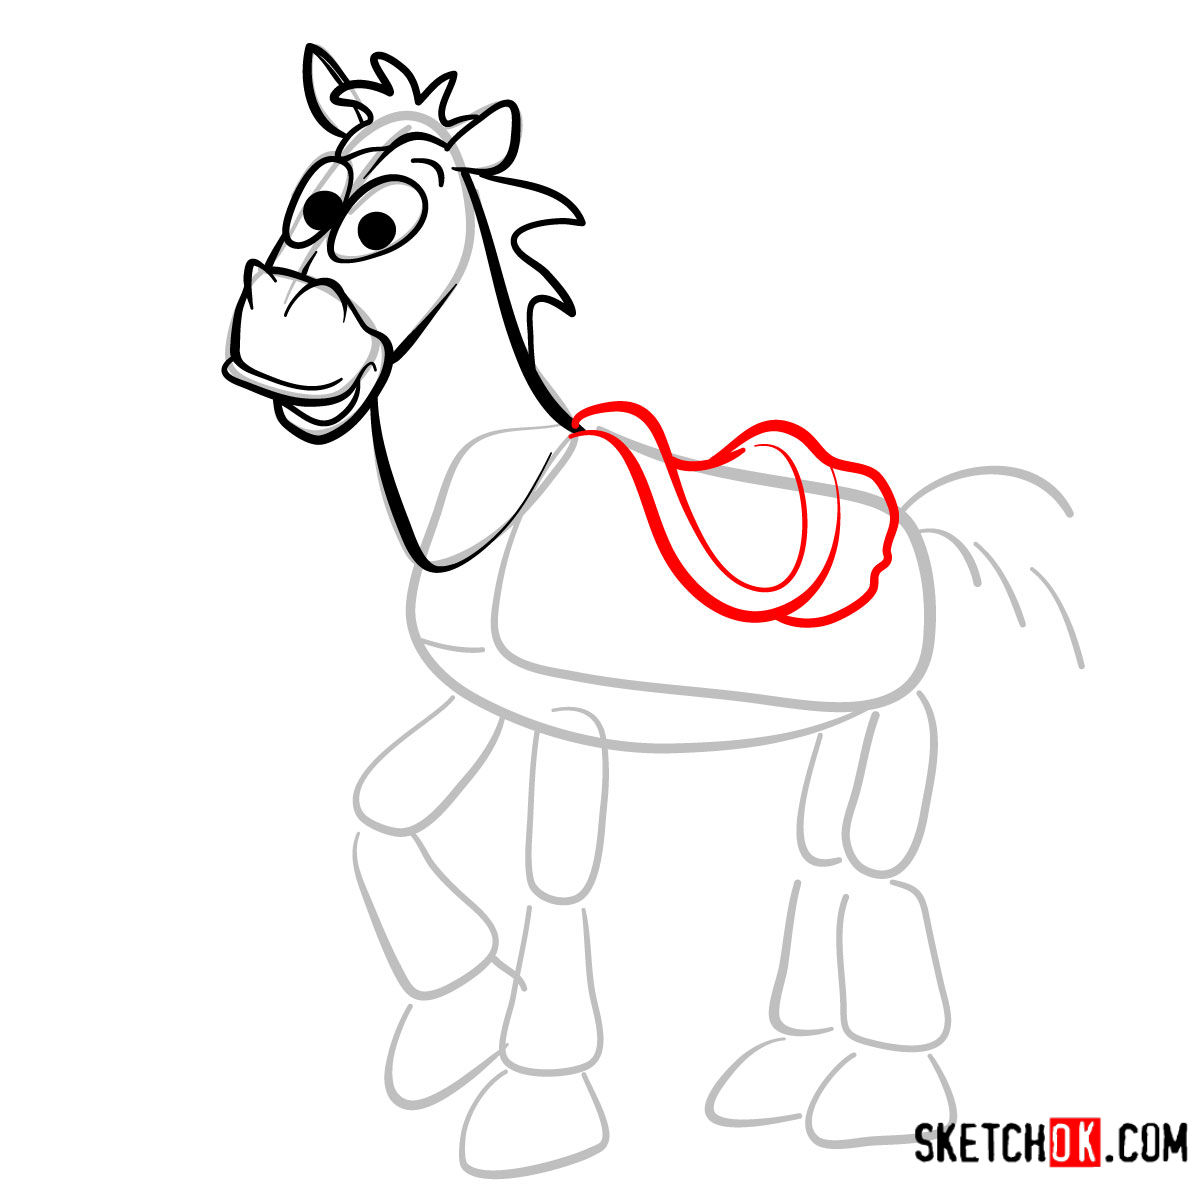 How to draw Bullseye from Toy Story - step 06